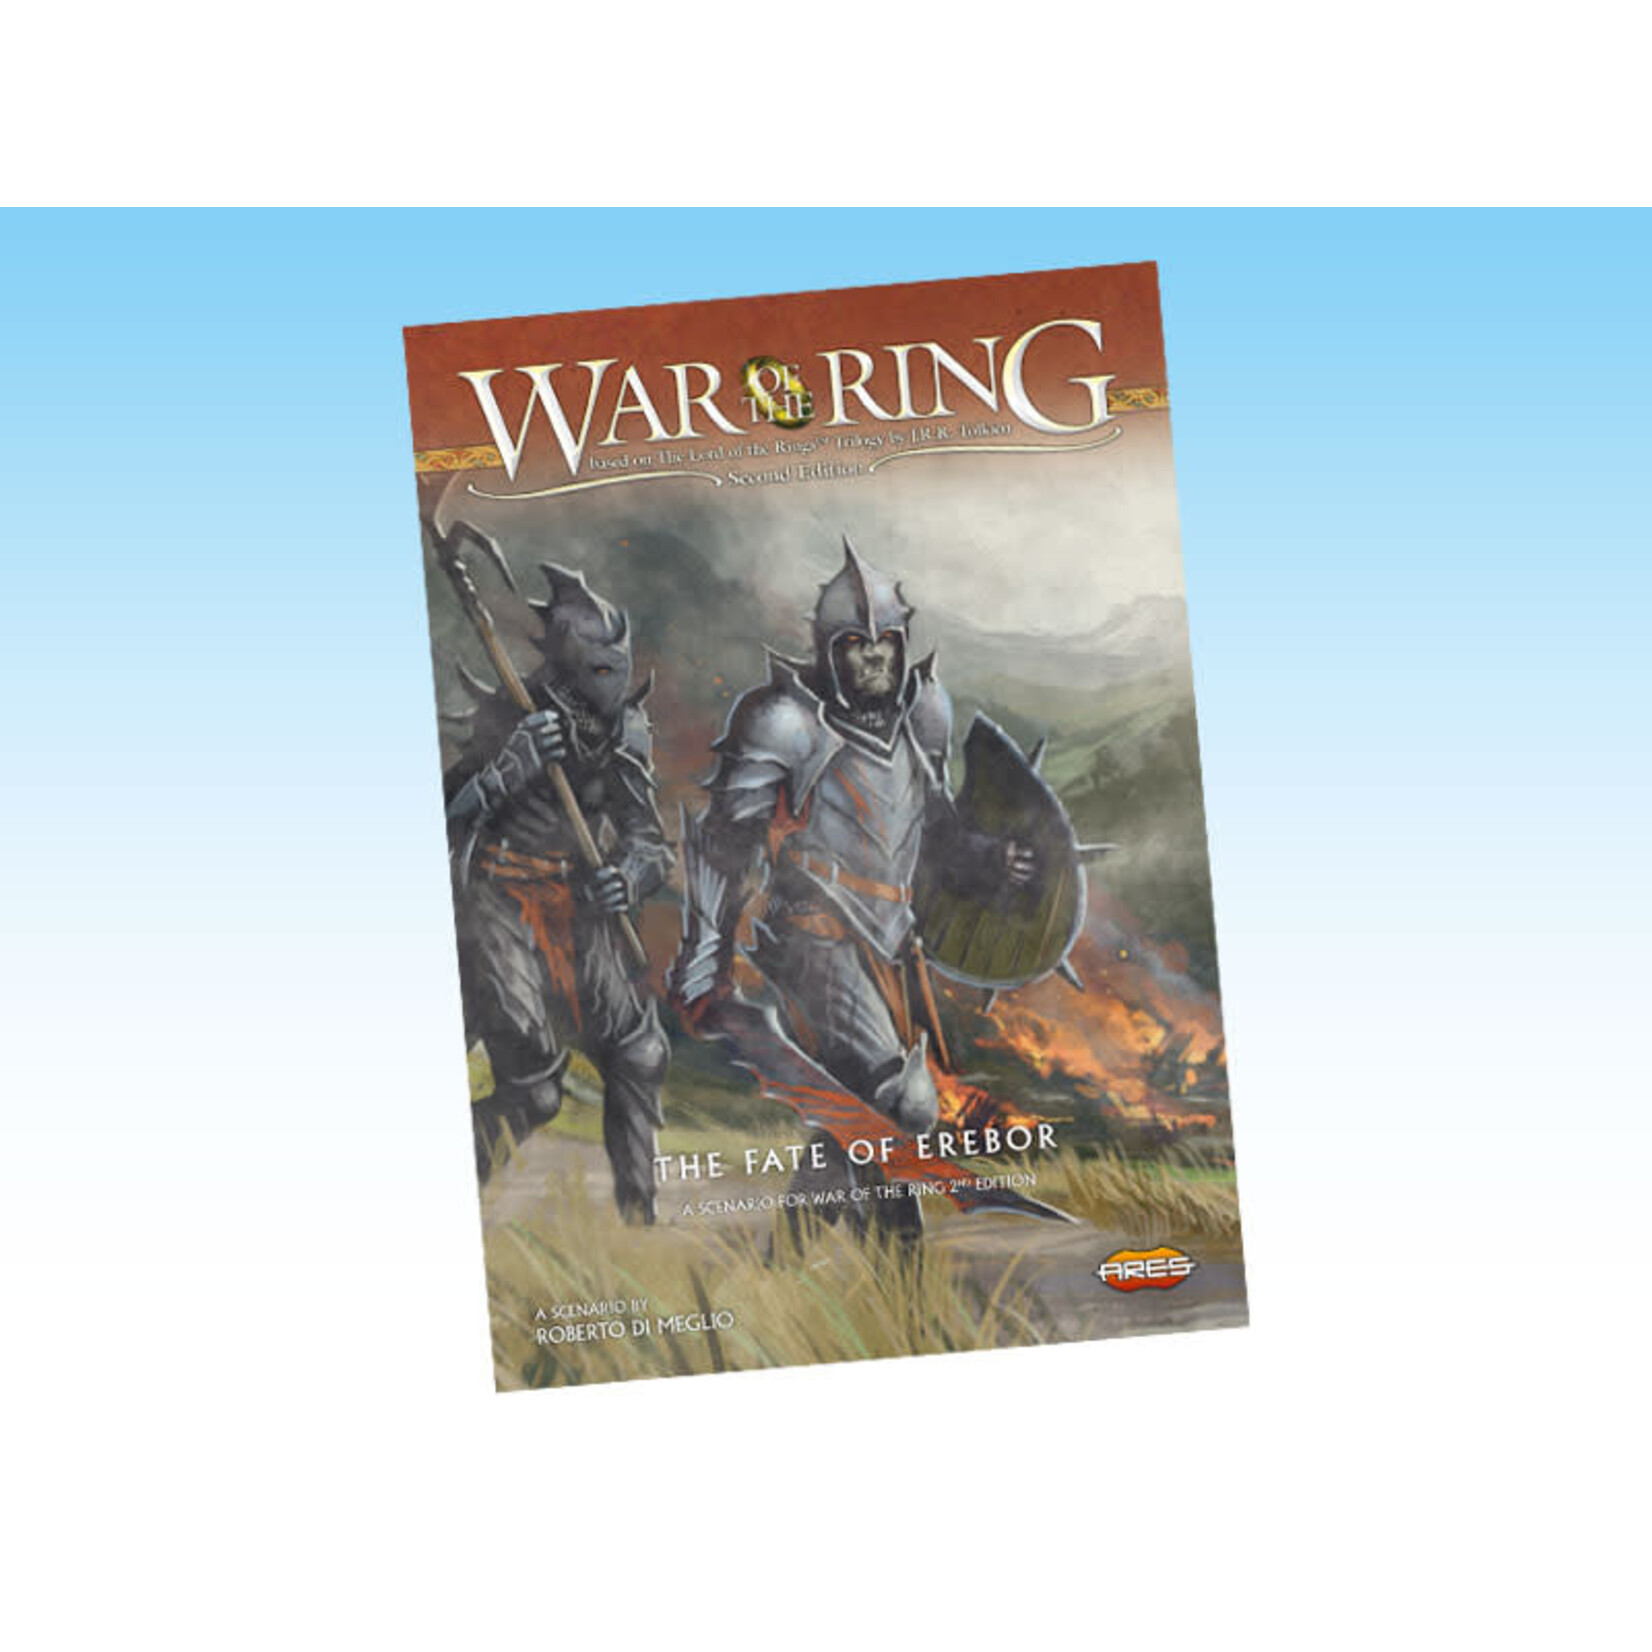 Ares Games War of the Ring: The Fate of Erebor Expansion